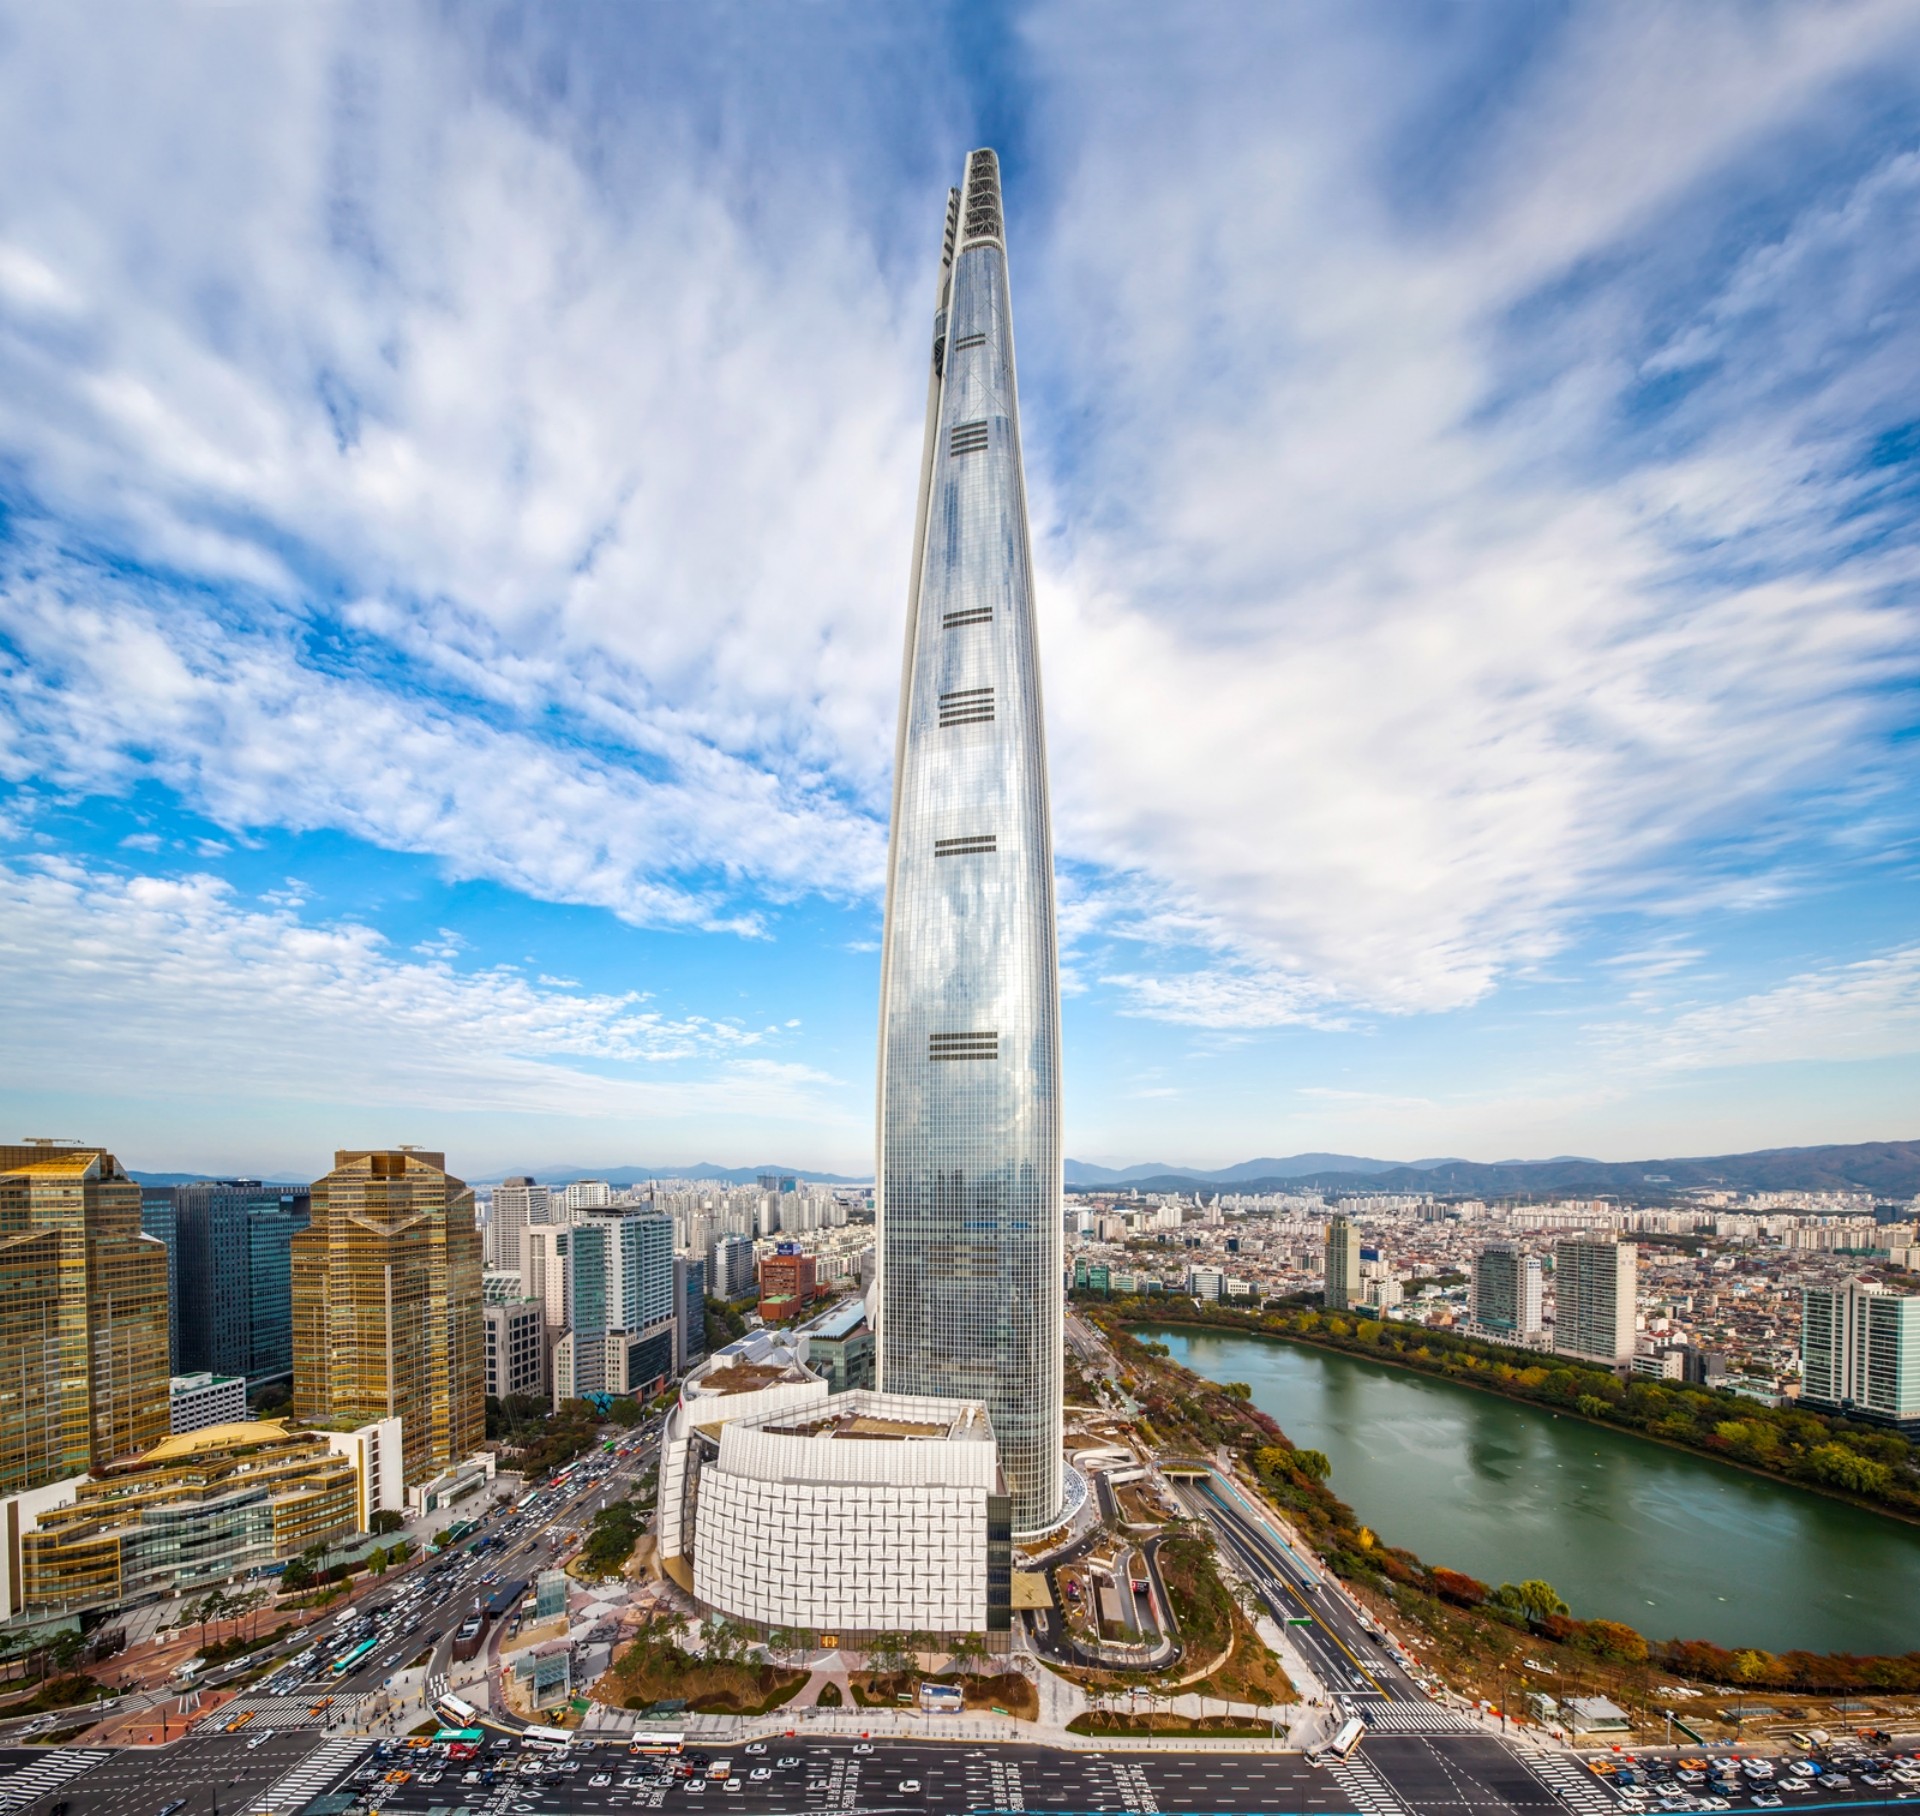 tour lotte world tower